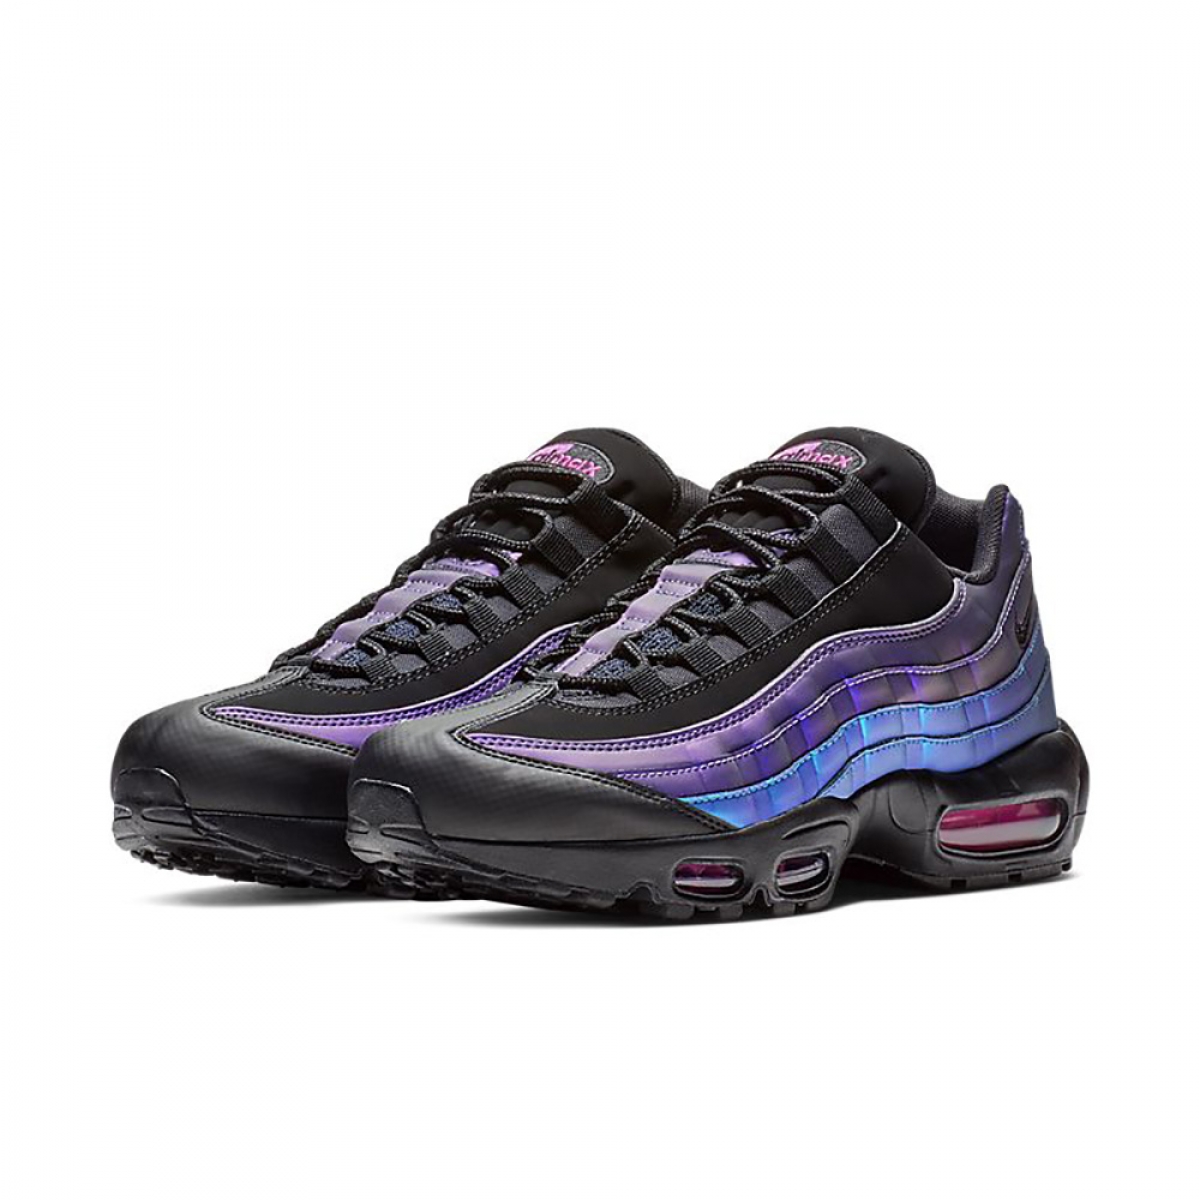 NIKE AIR MAX 95 PRM THROWBACK TO FUTURE for £130.00